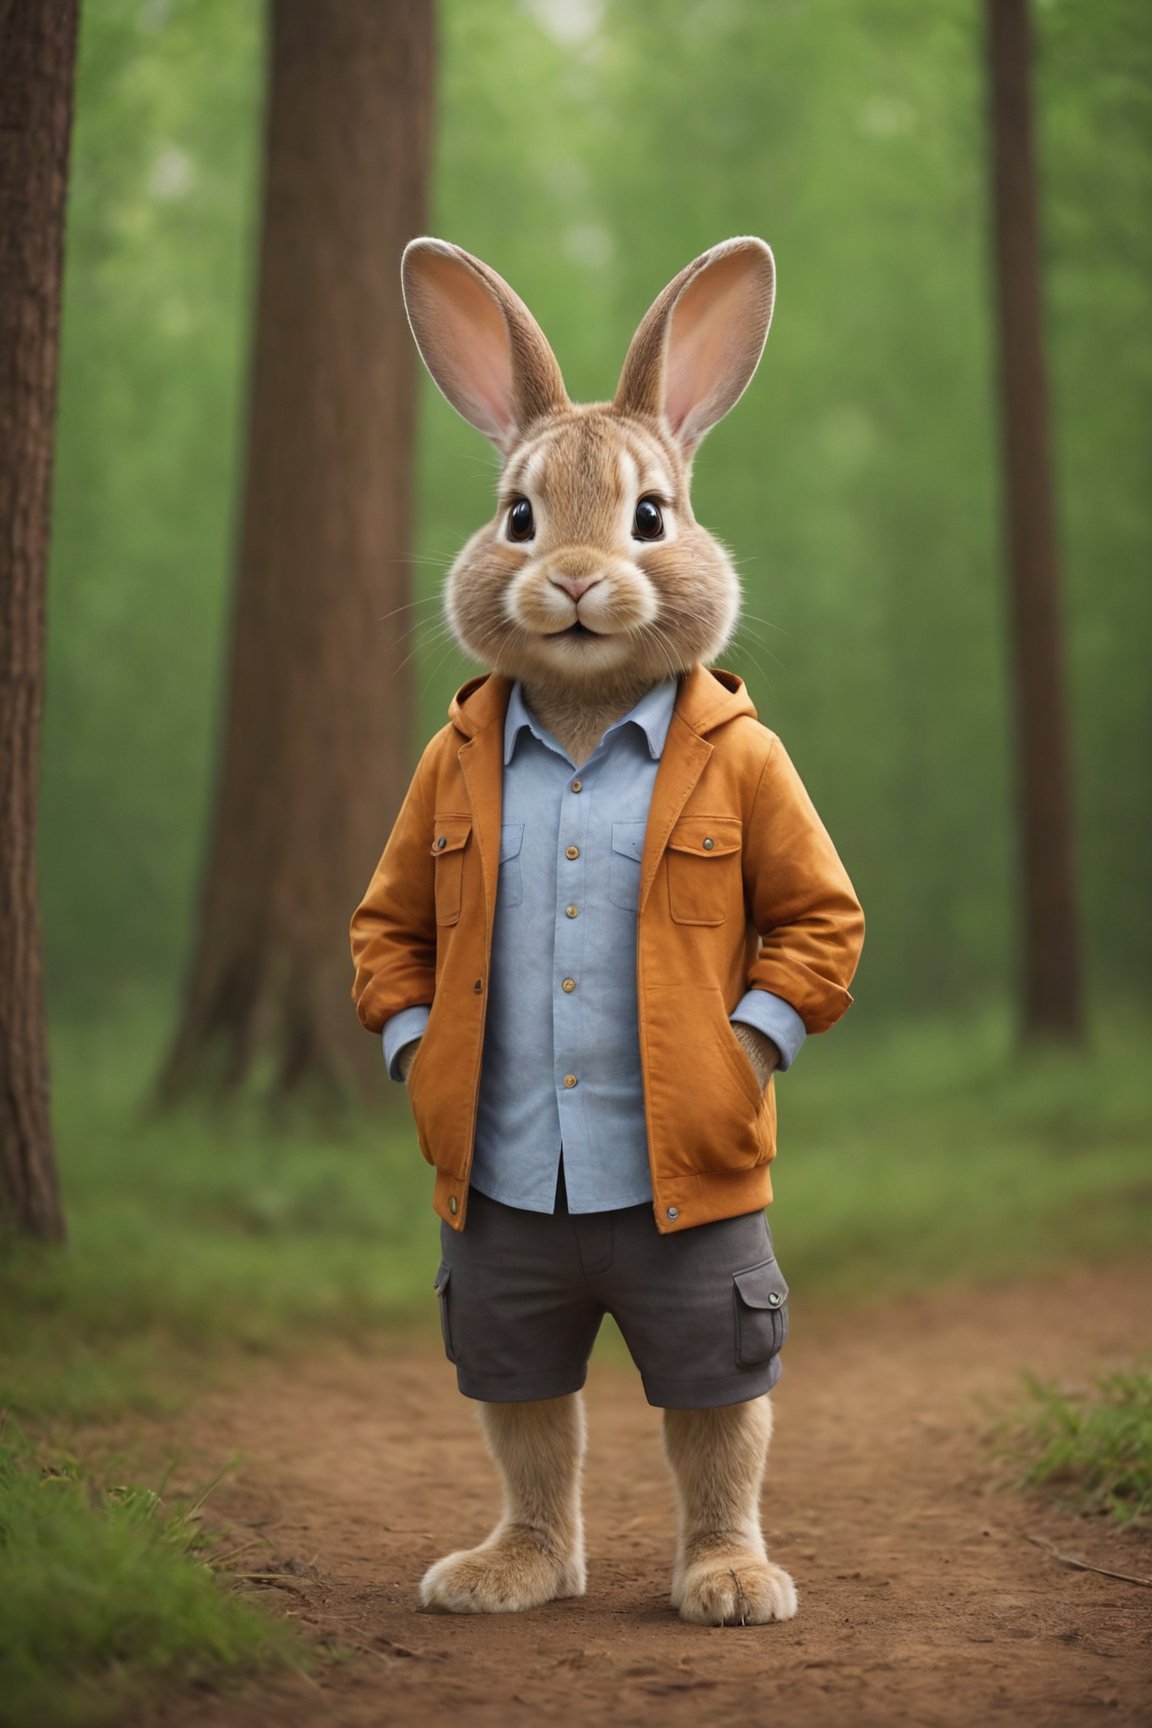 a cute bunny,Wear travel attire,Parchment in hand,Walk in the forest
